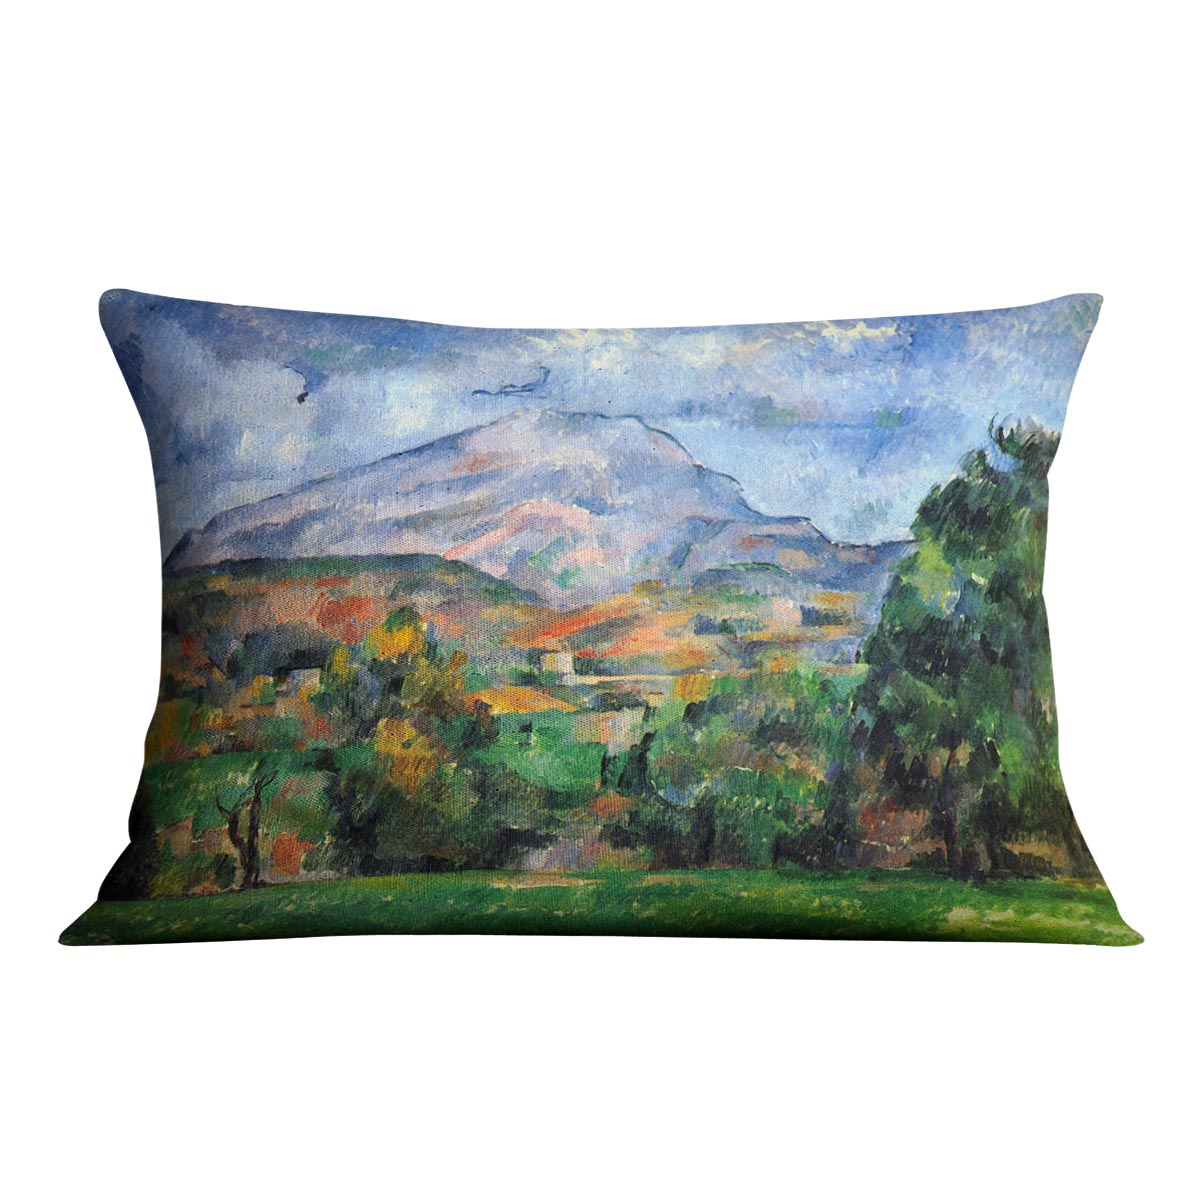 Mount St. Victoire by Cezanne Cushion